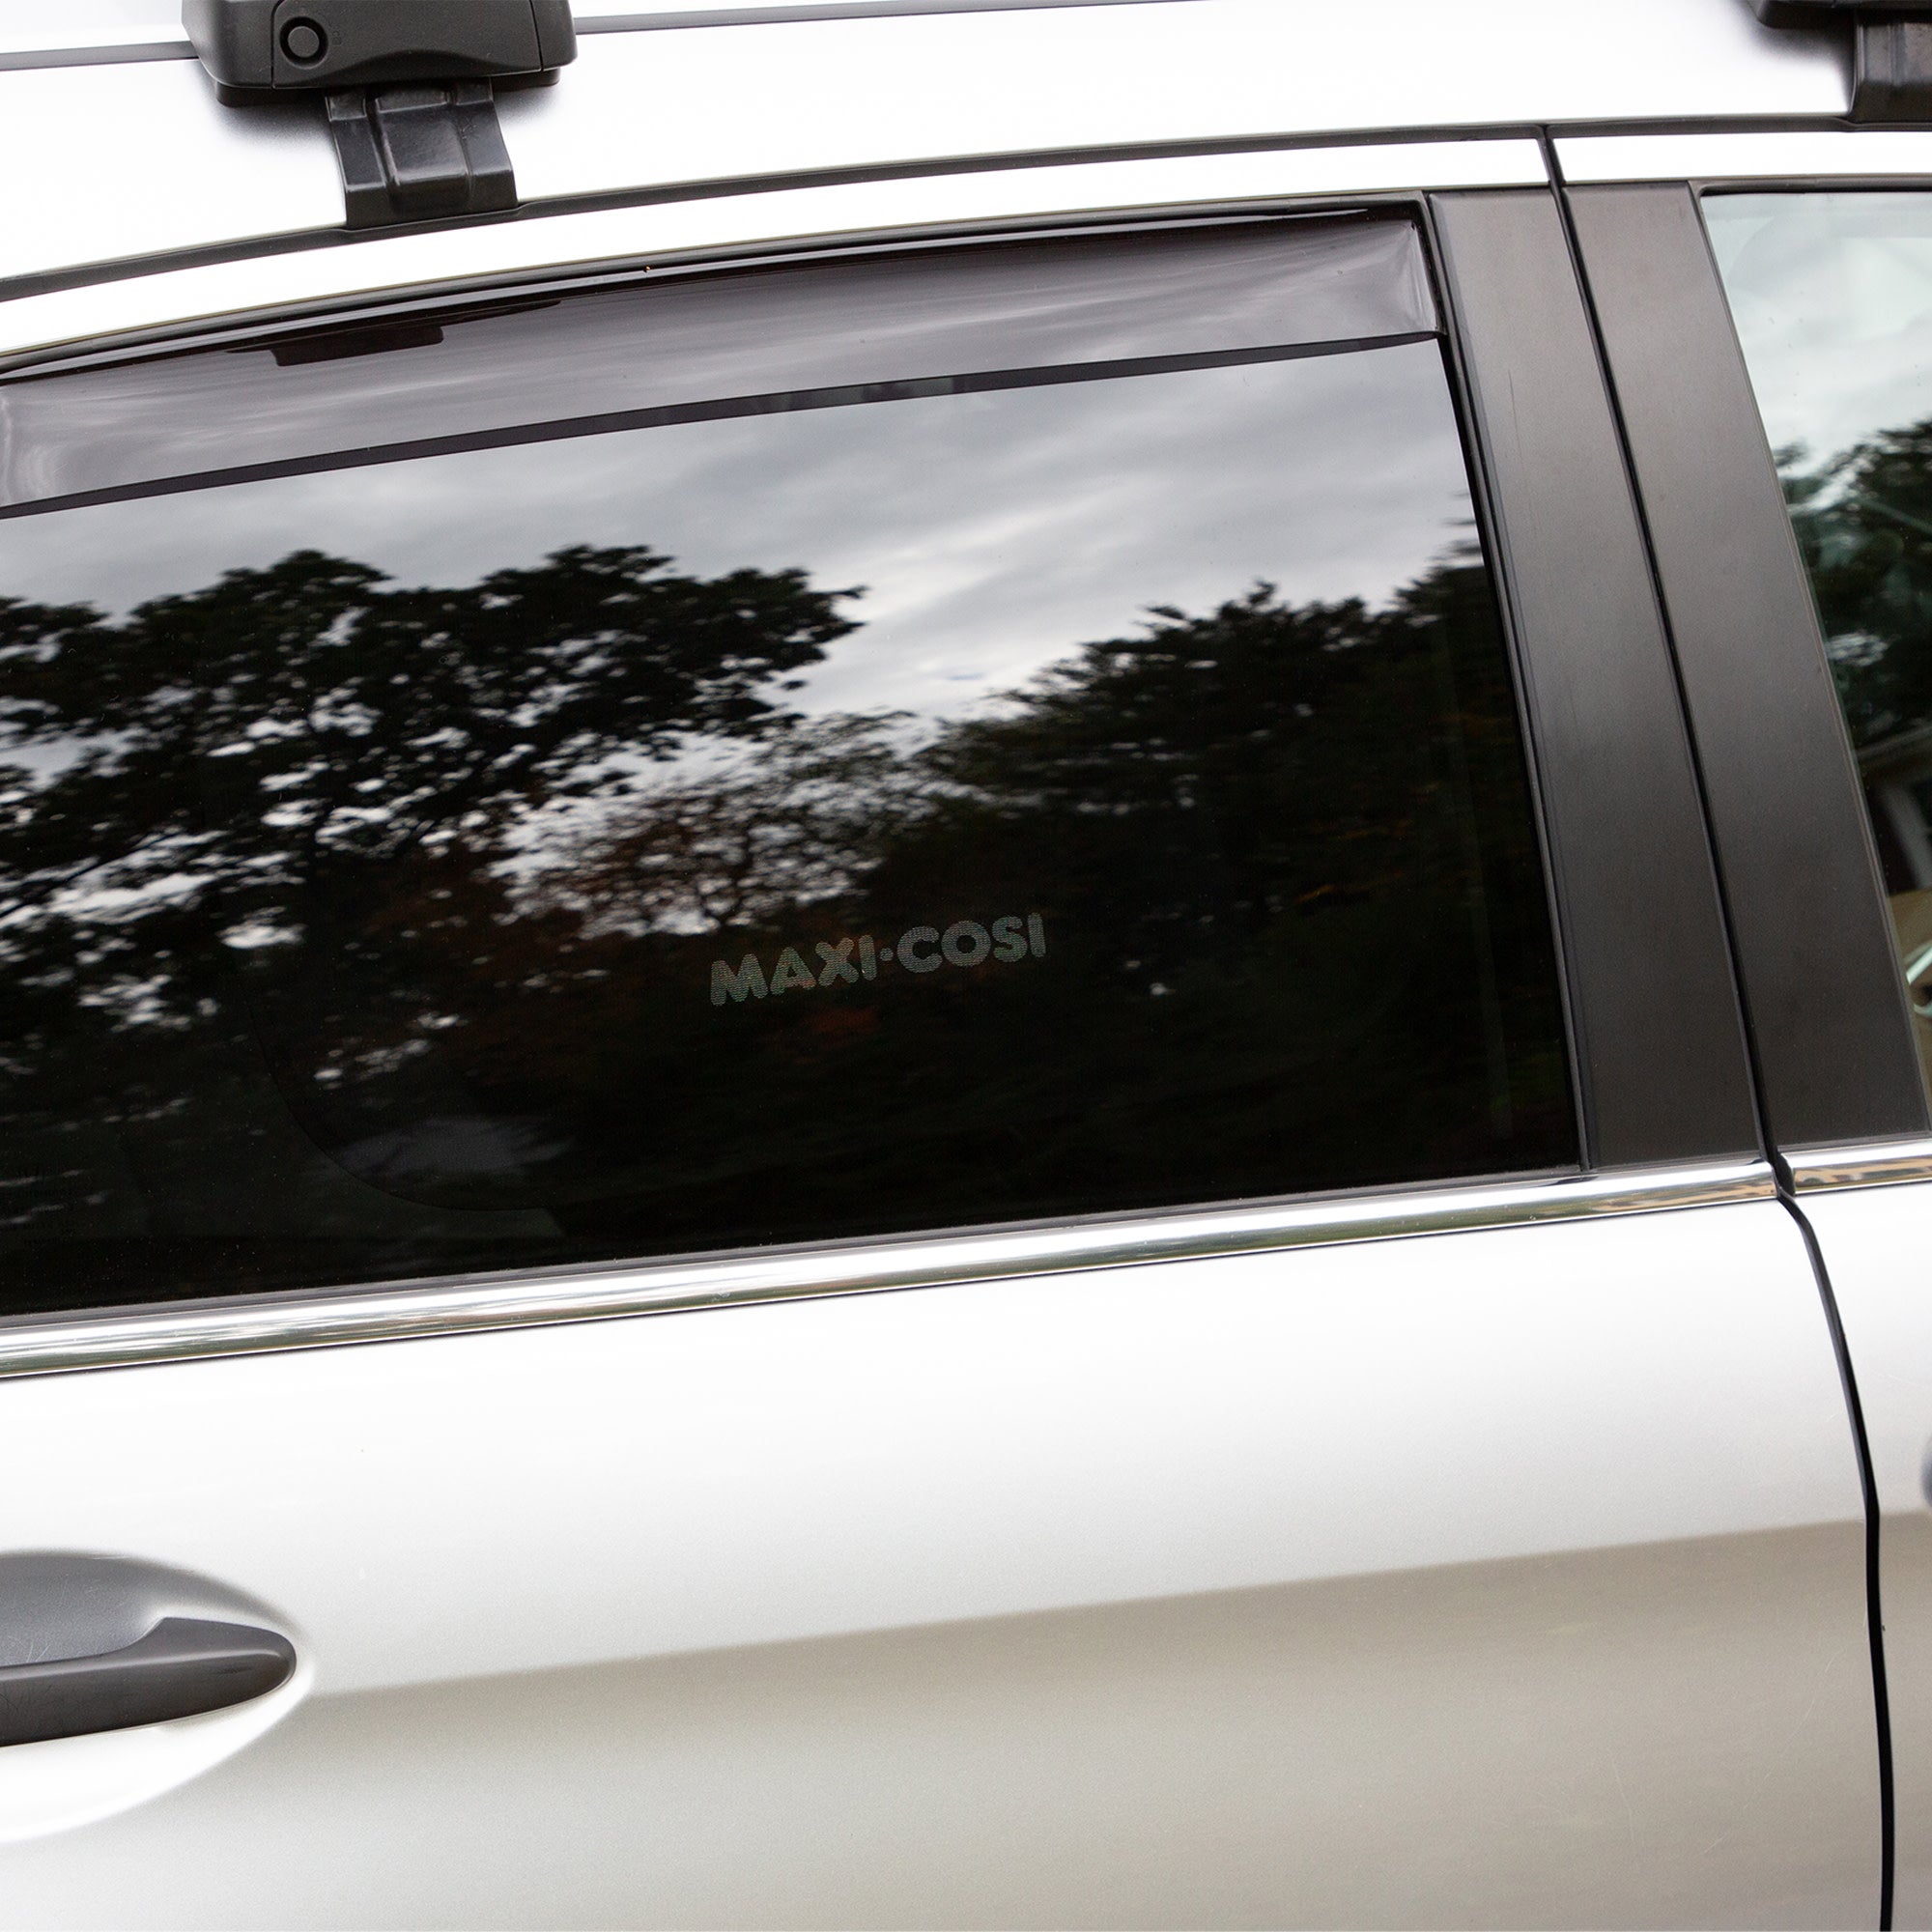 Removable sunshade screen for car windows